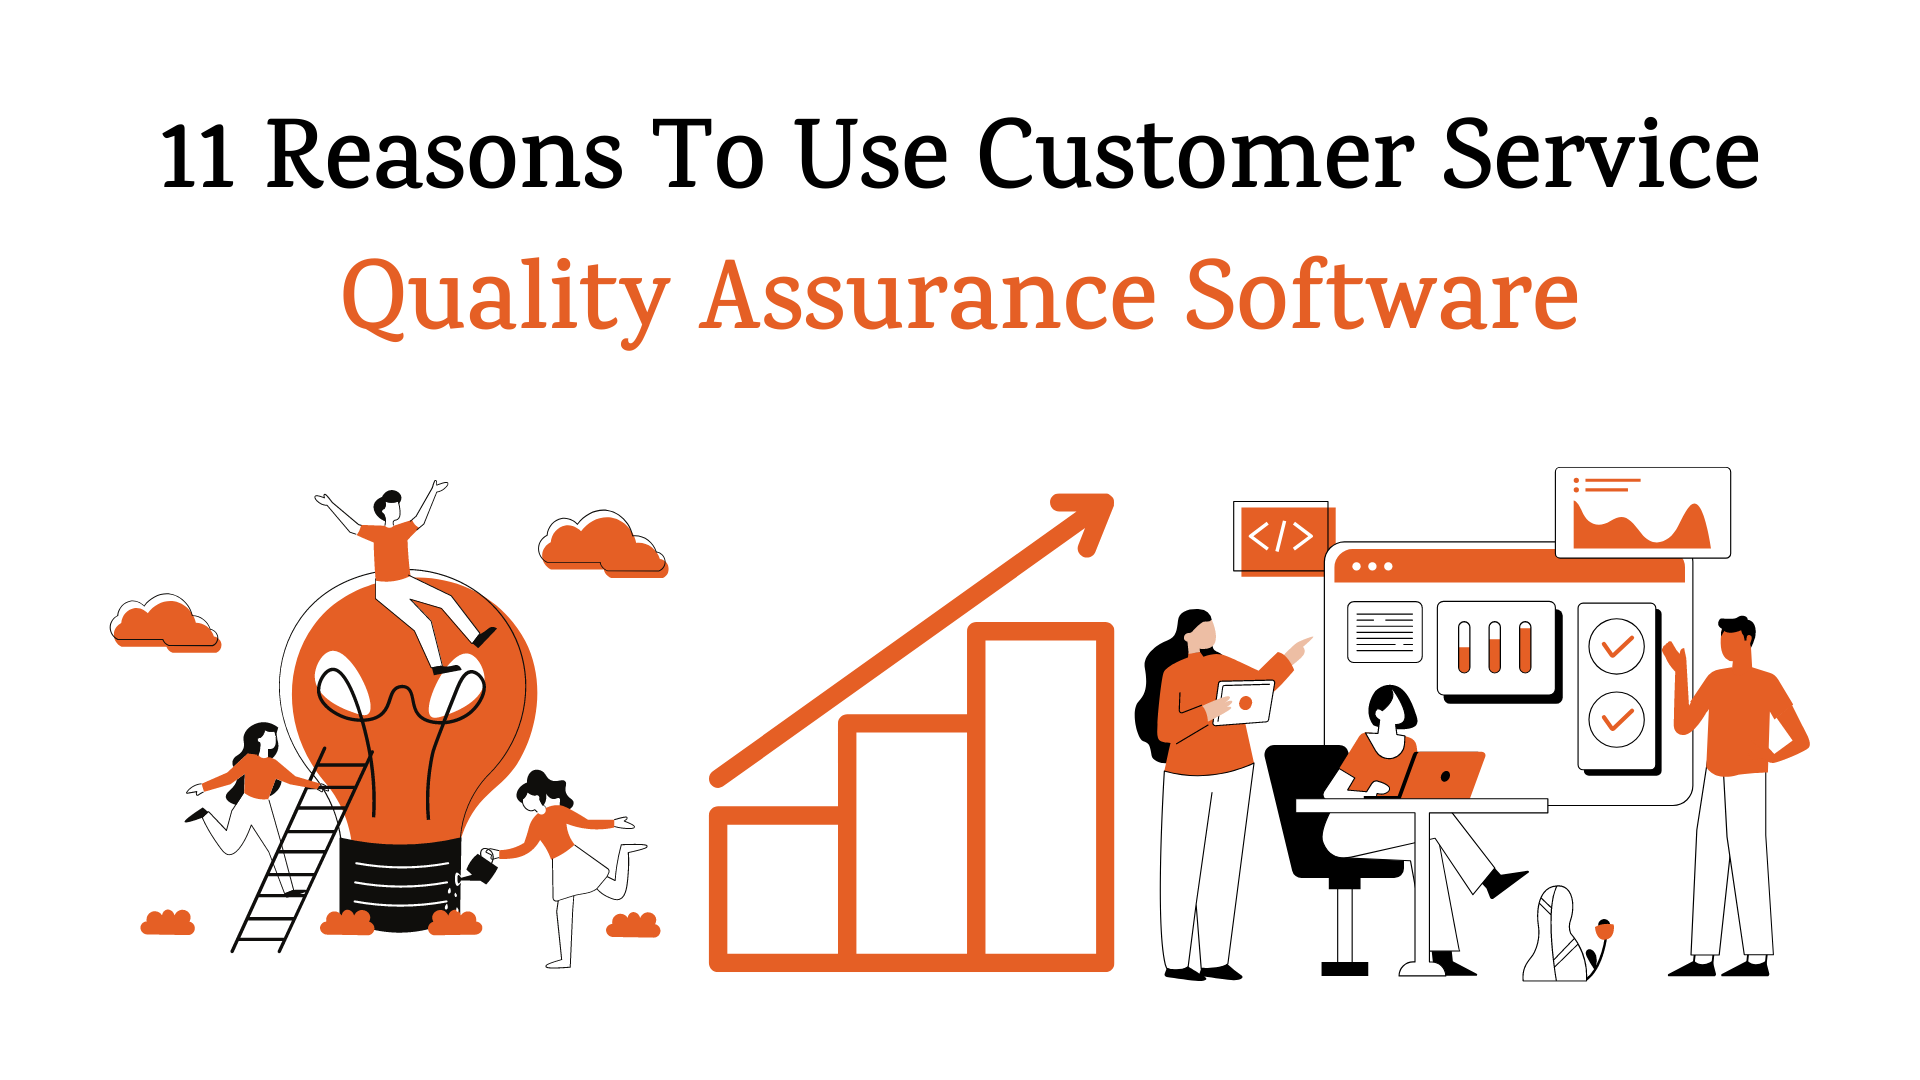 11 Reasons To Use Customer Service Quality Assurance Software